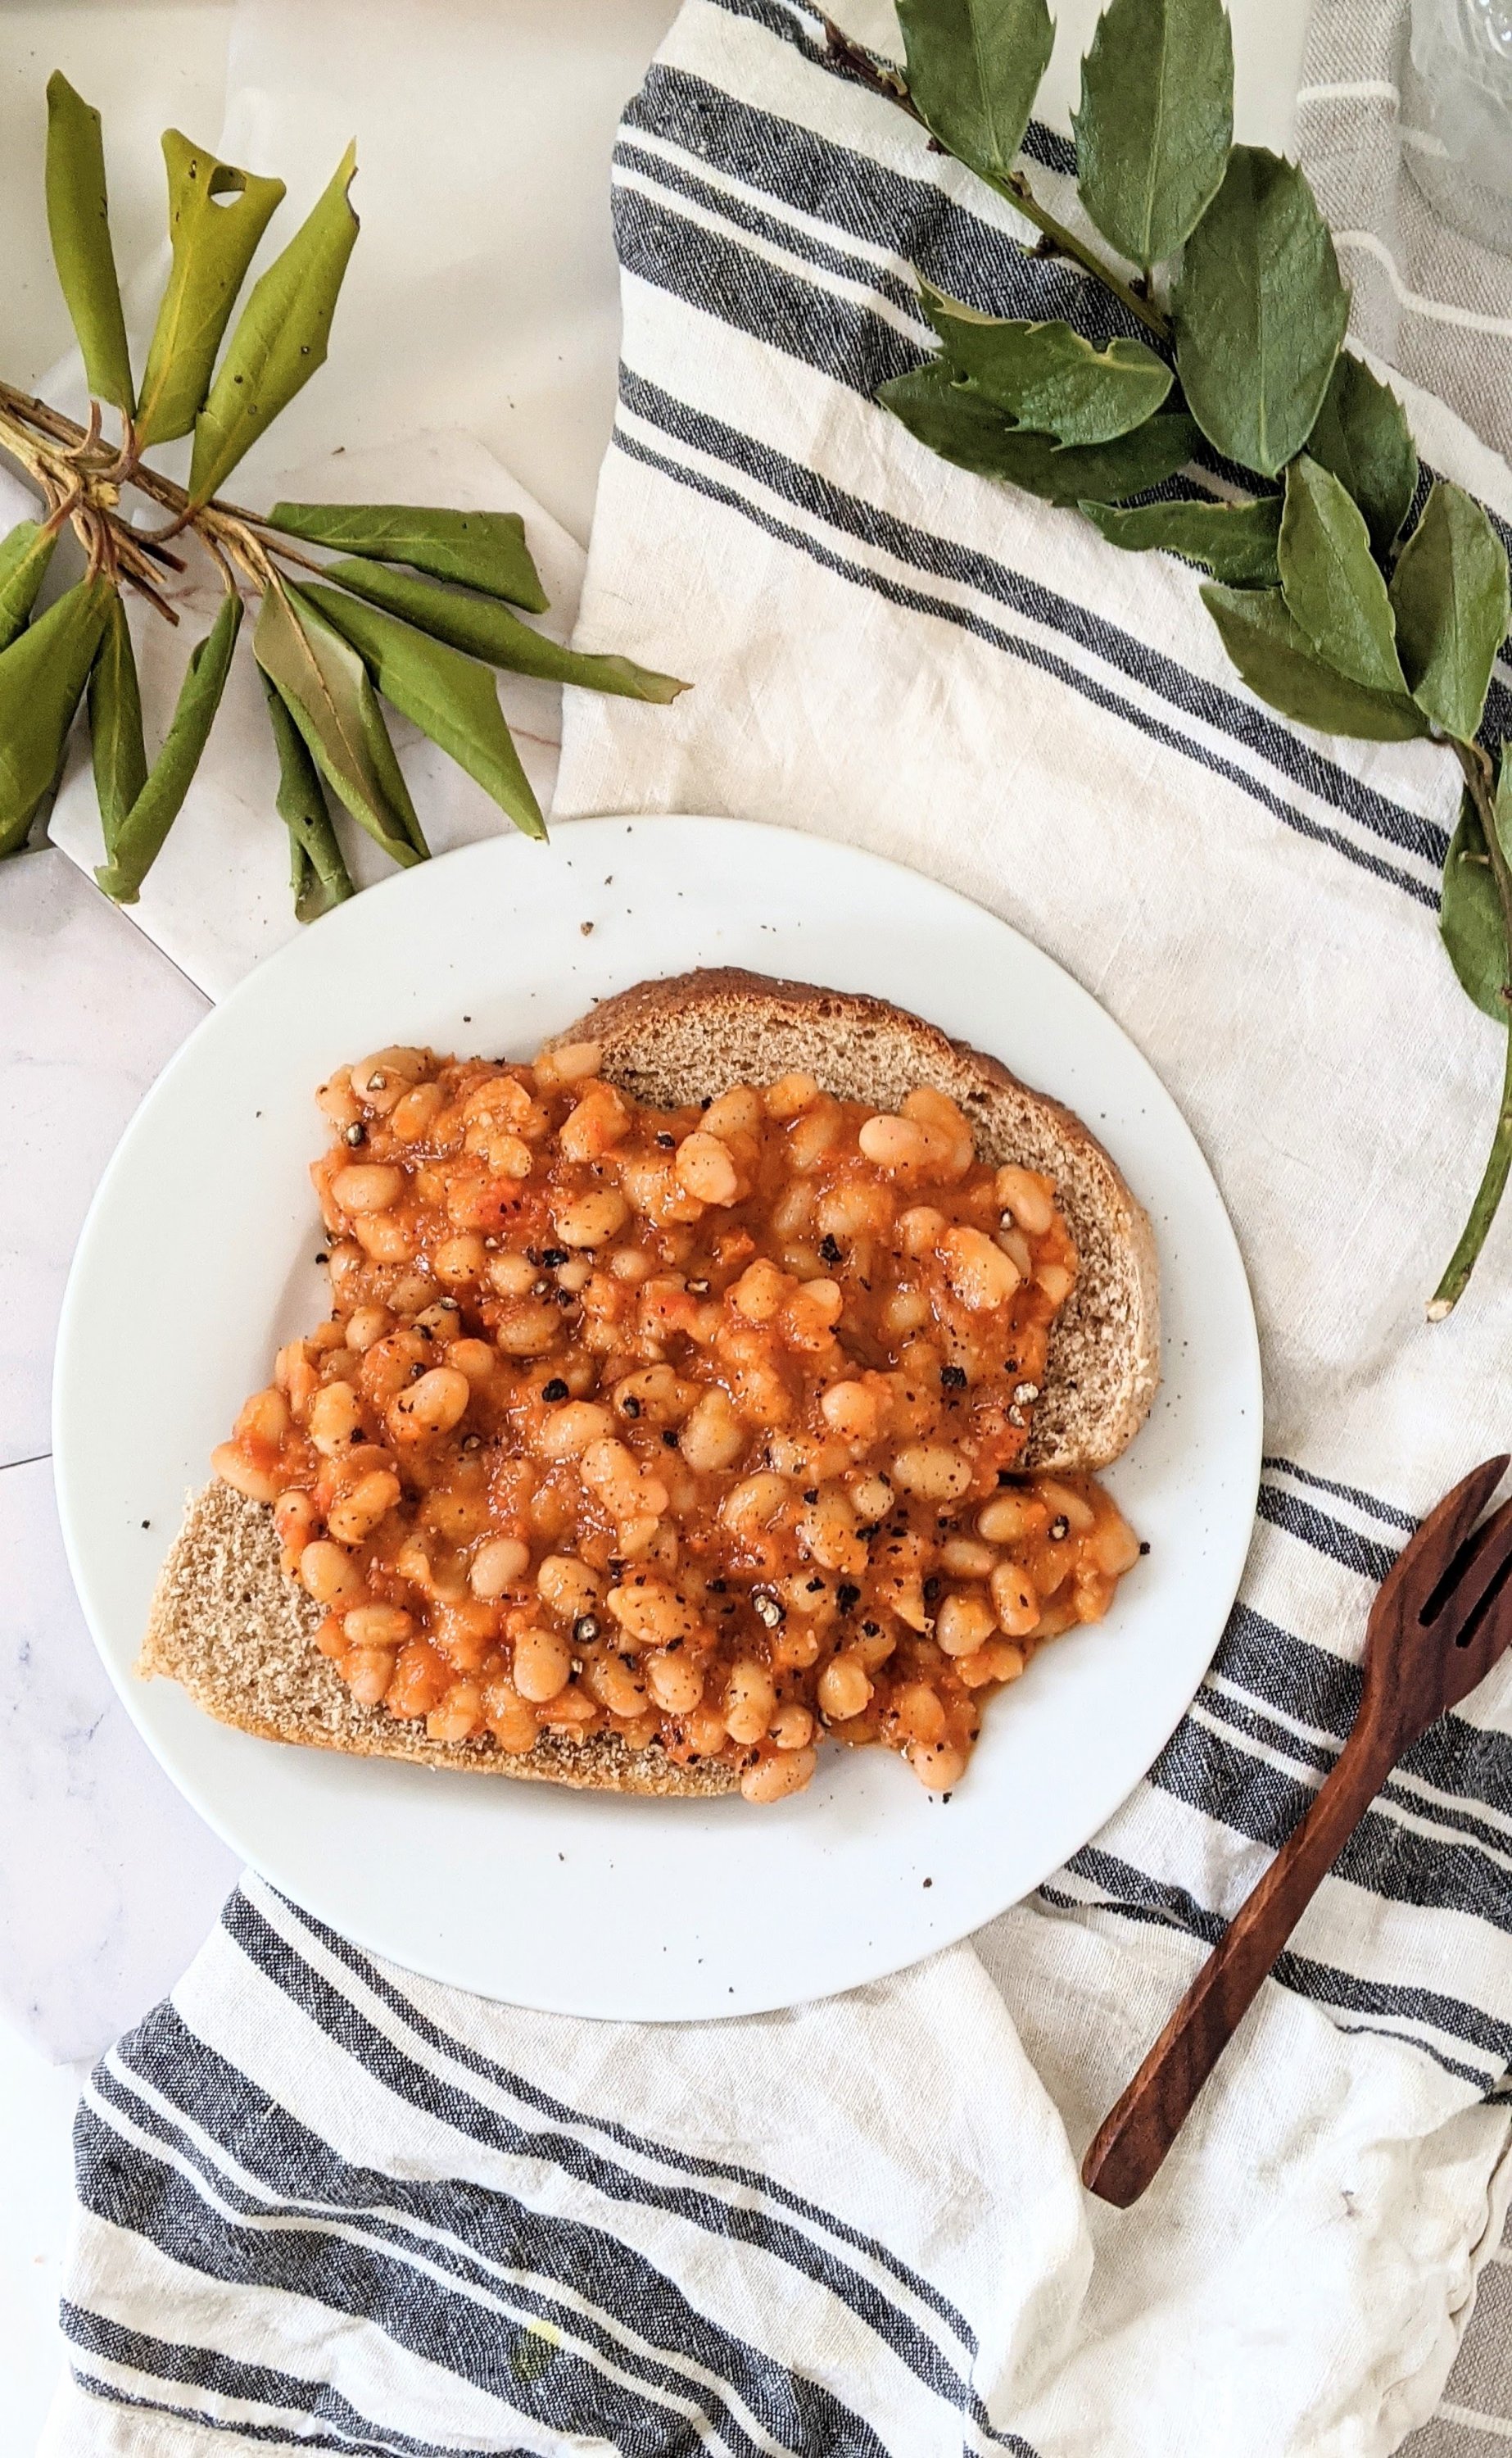 vegan posh beans on toast with tomato sauce vegetarian gluten free low sodium beans on toast gluten free plant based healthy english breakfast ideas brunch for british brunch recipes for americans